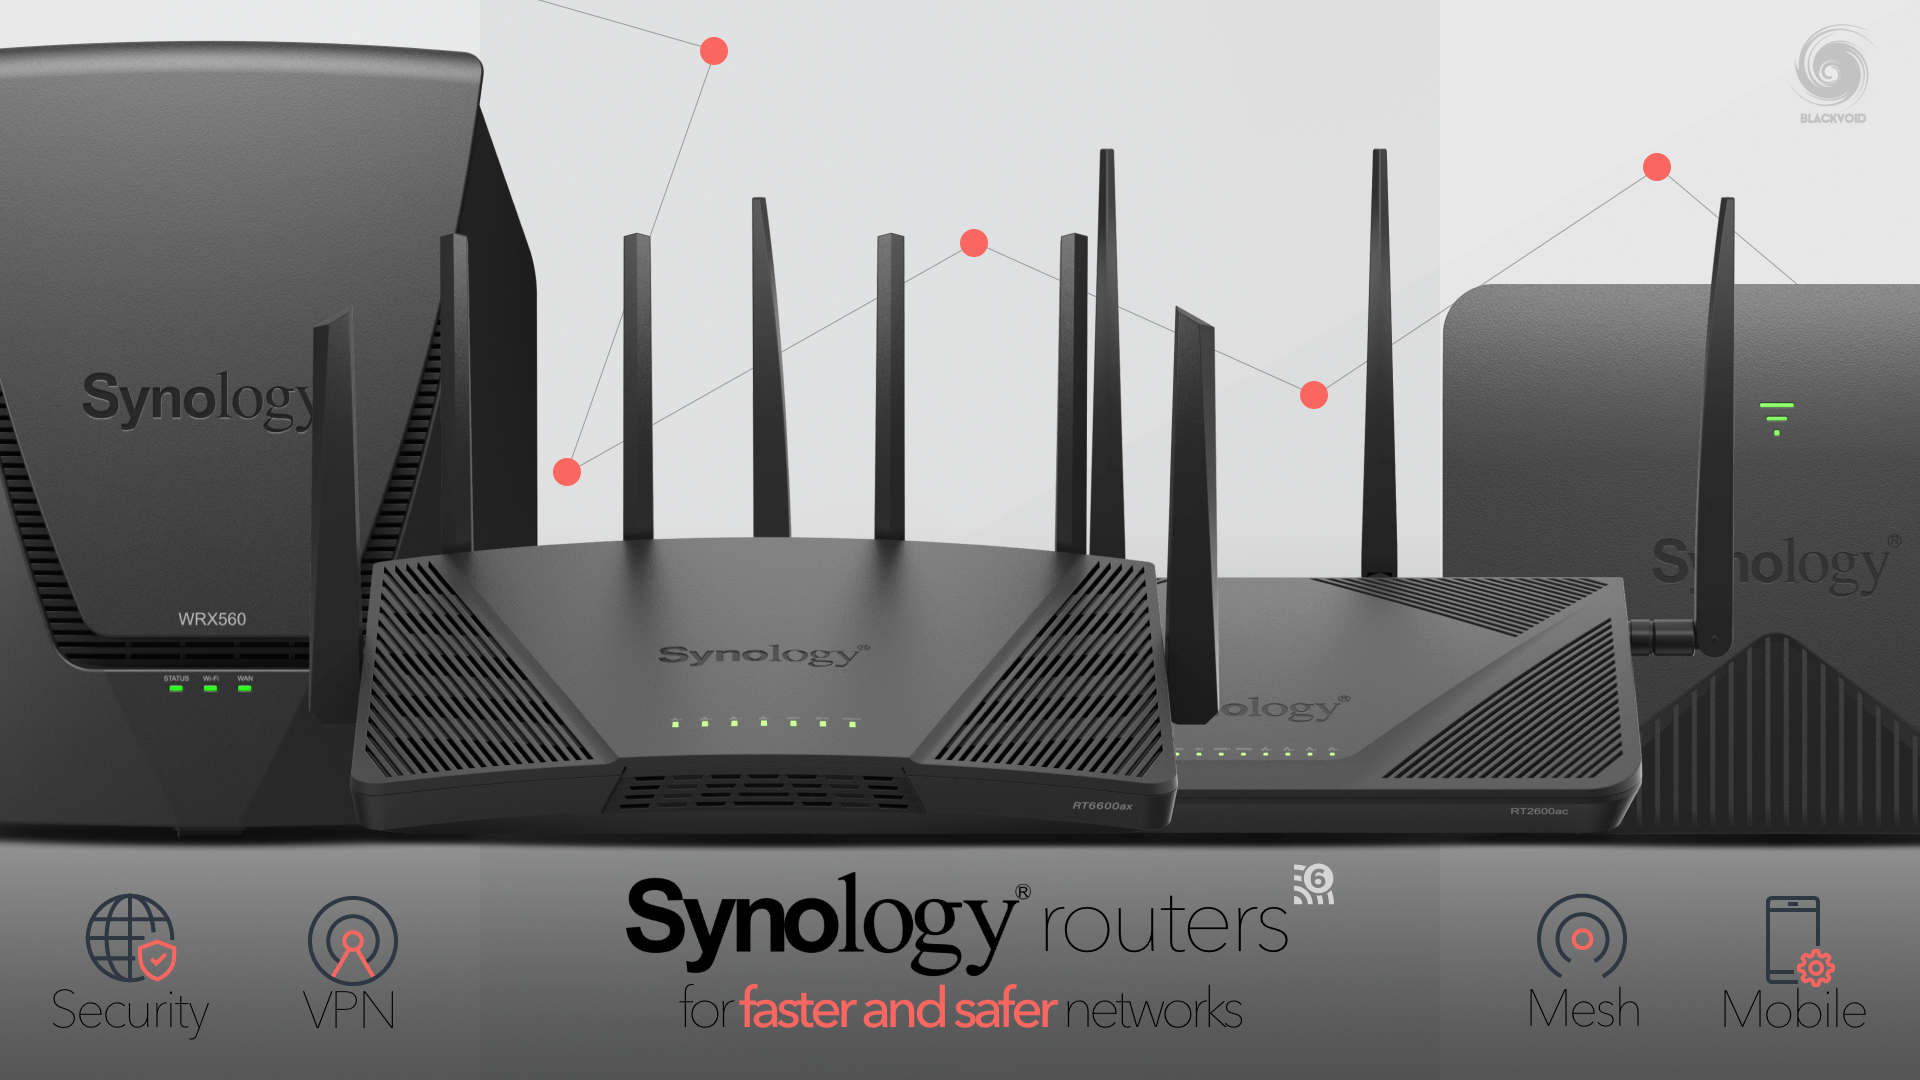 Synology routers - for faster and safer networks